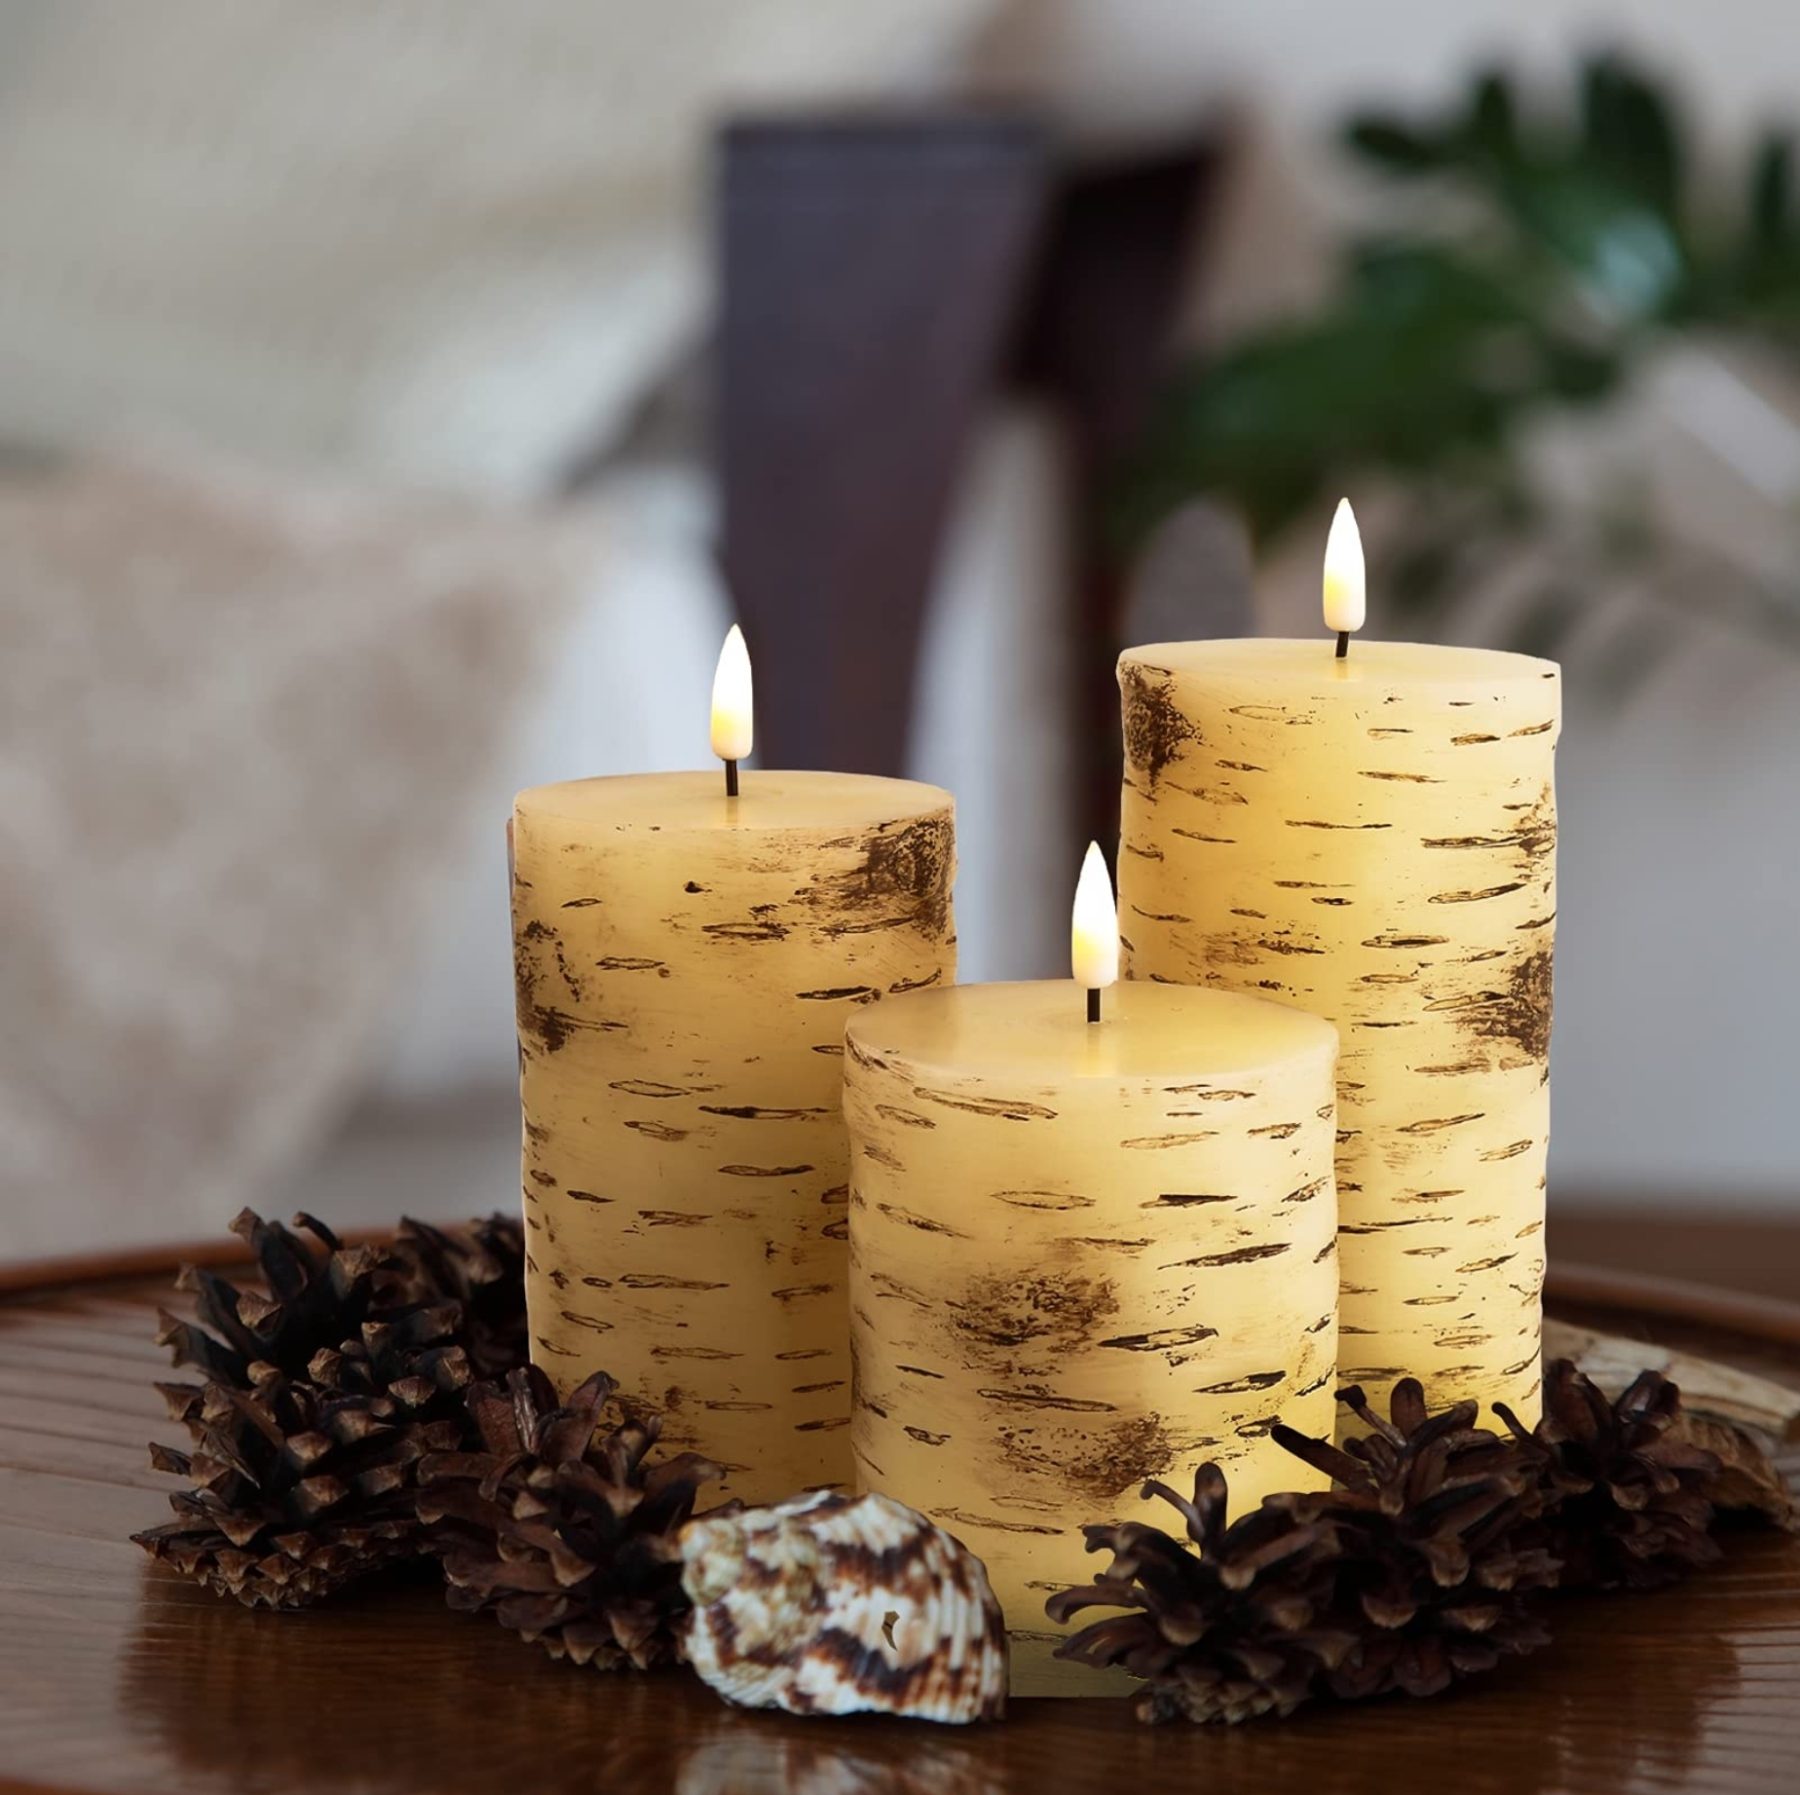 Eywamage Large Realistic Birch Bark Flameless Pillar Candles with Remote Control.